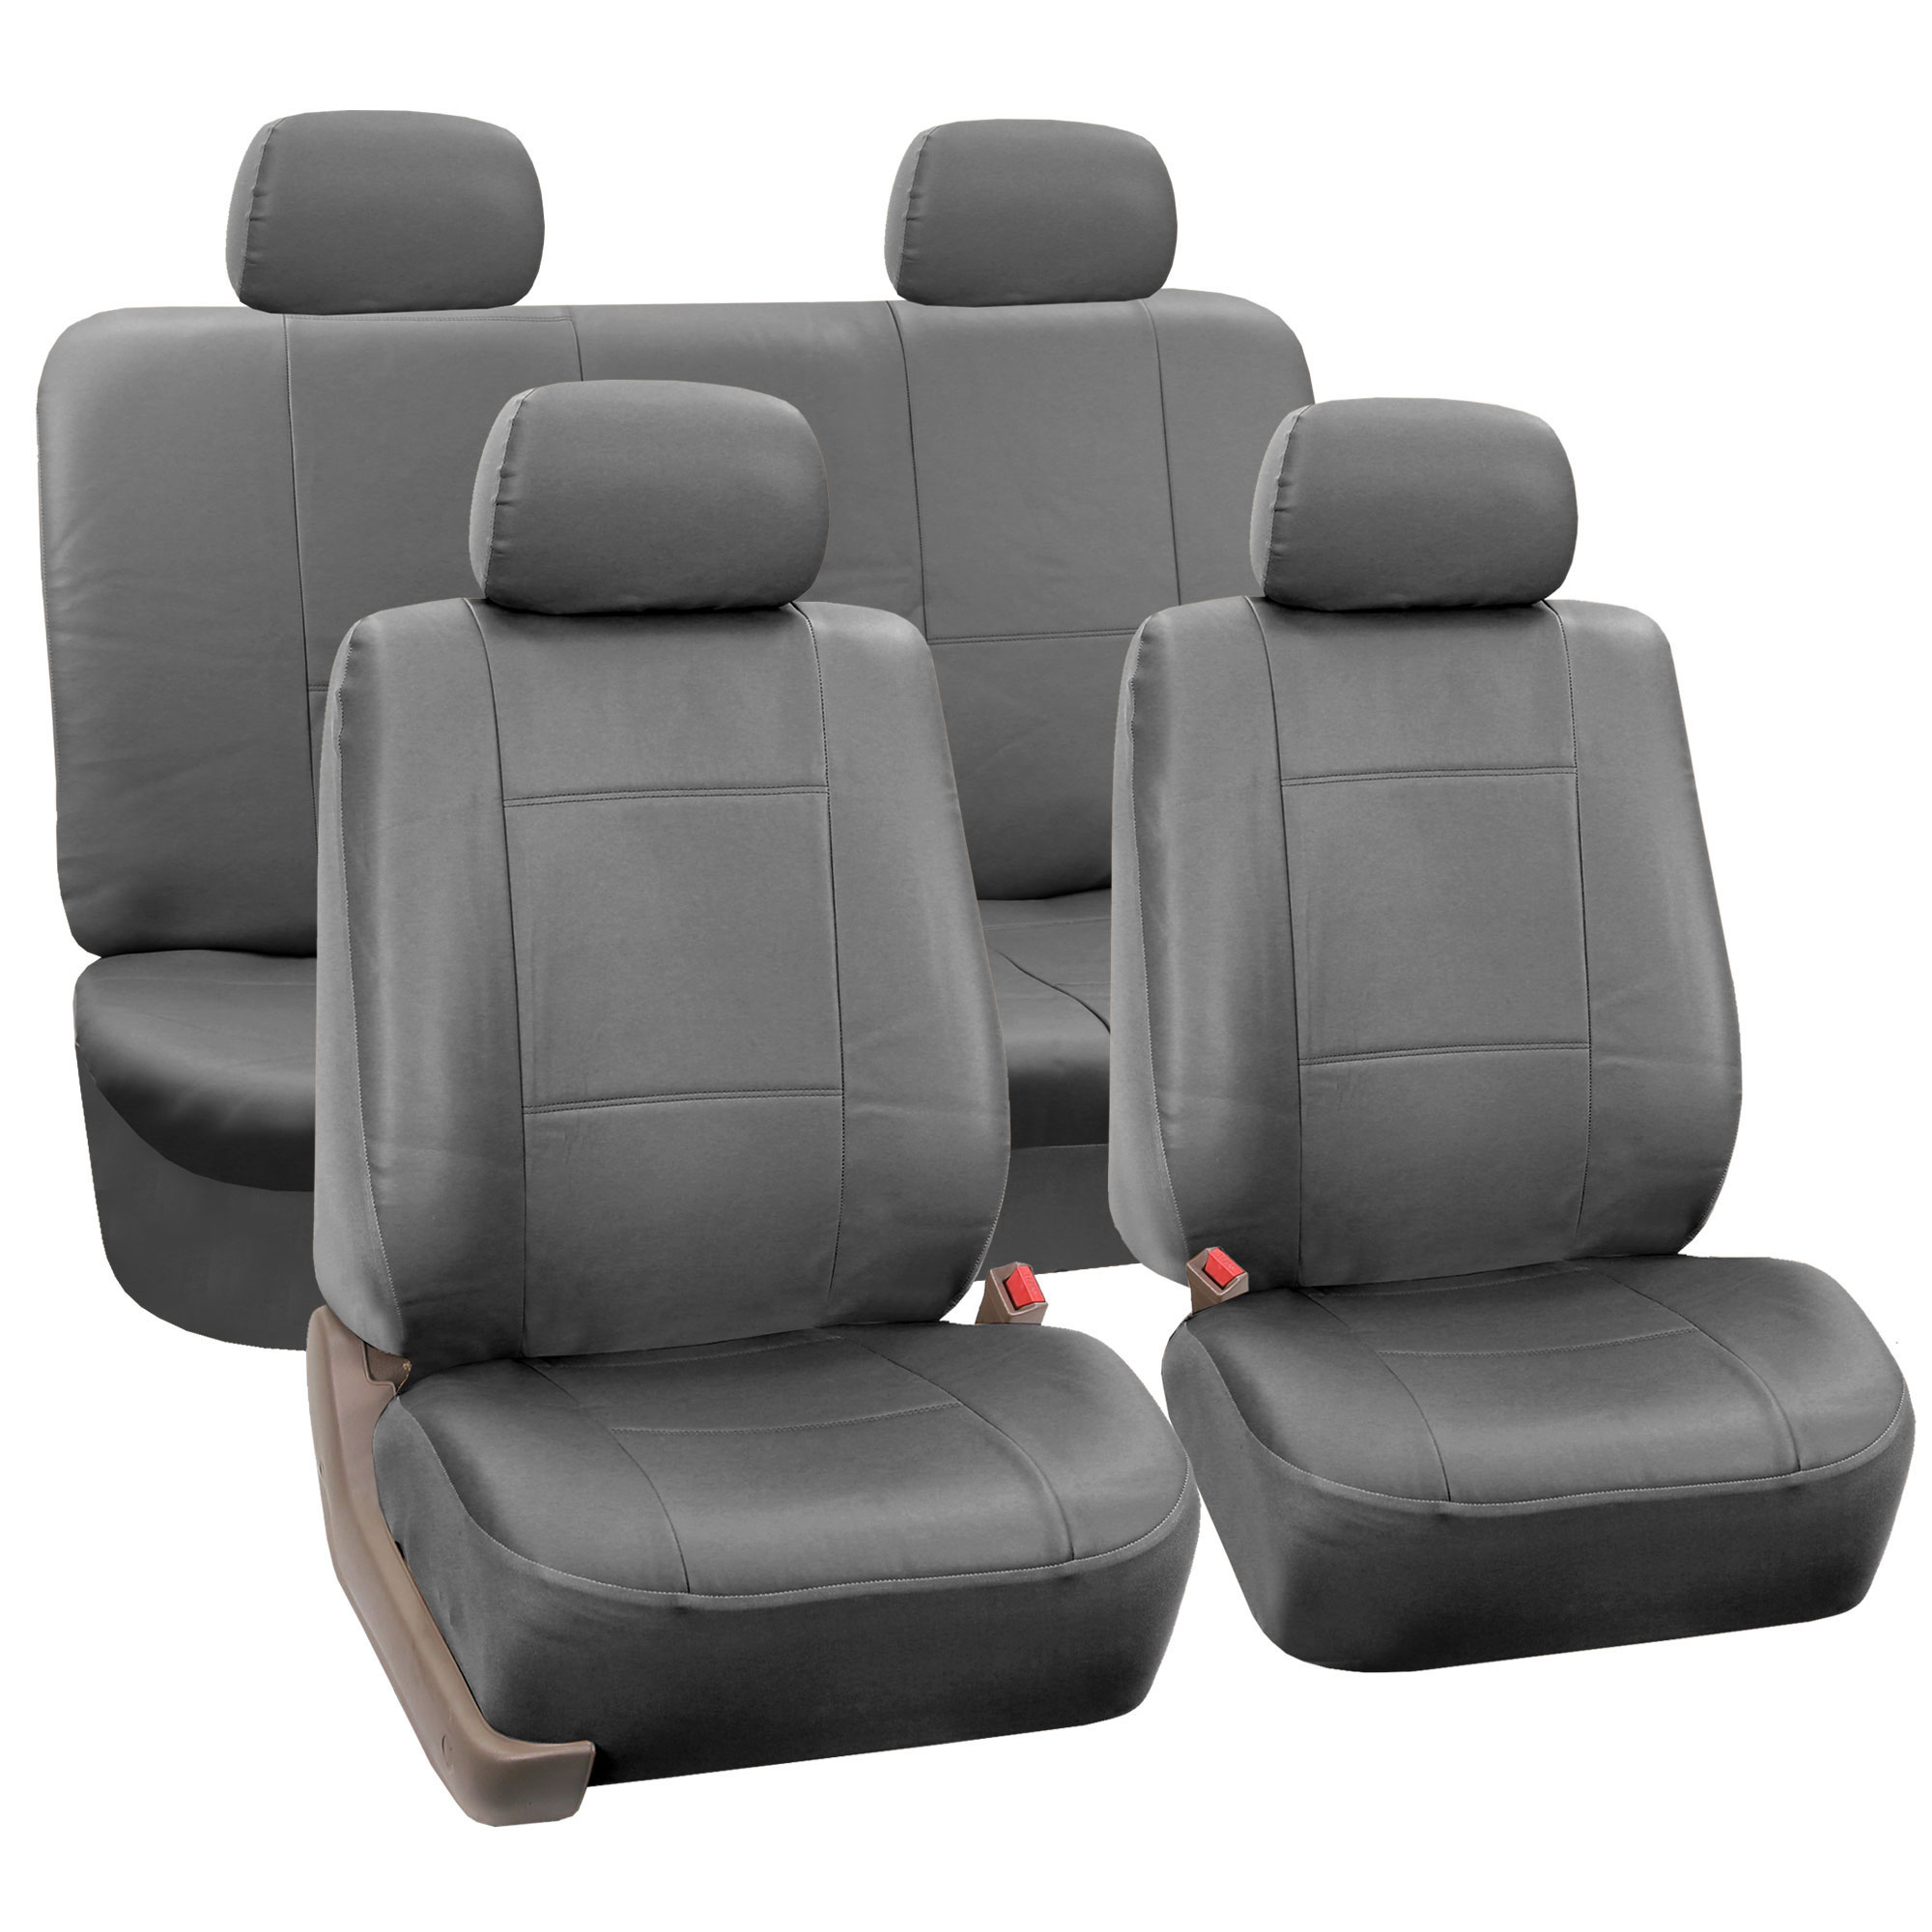 FH Group Faux Leather Airbag Compatible and Split Bench Car Seat Covers, Full Set, Gray - image 1 of 4